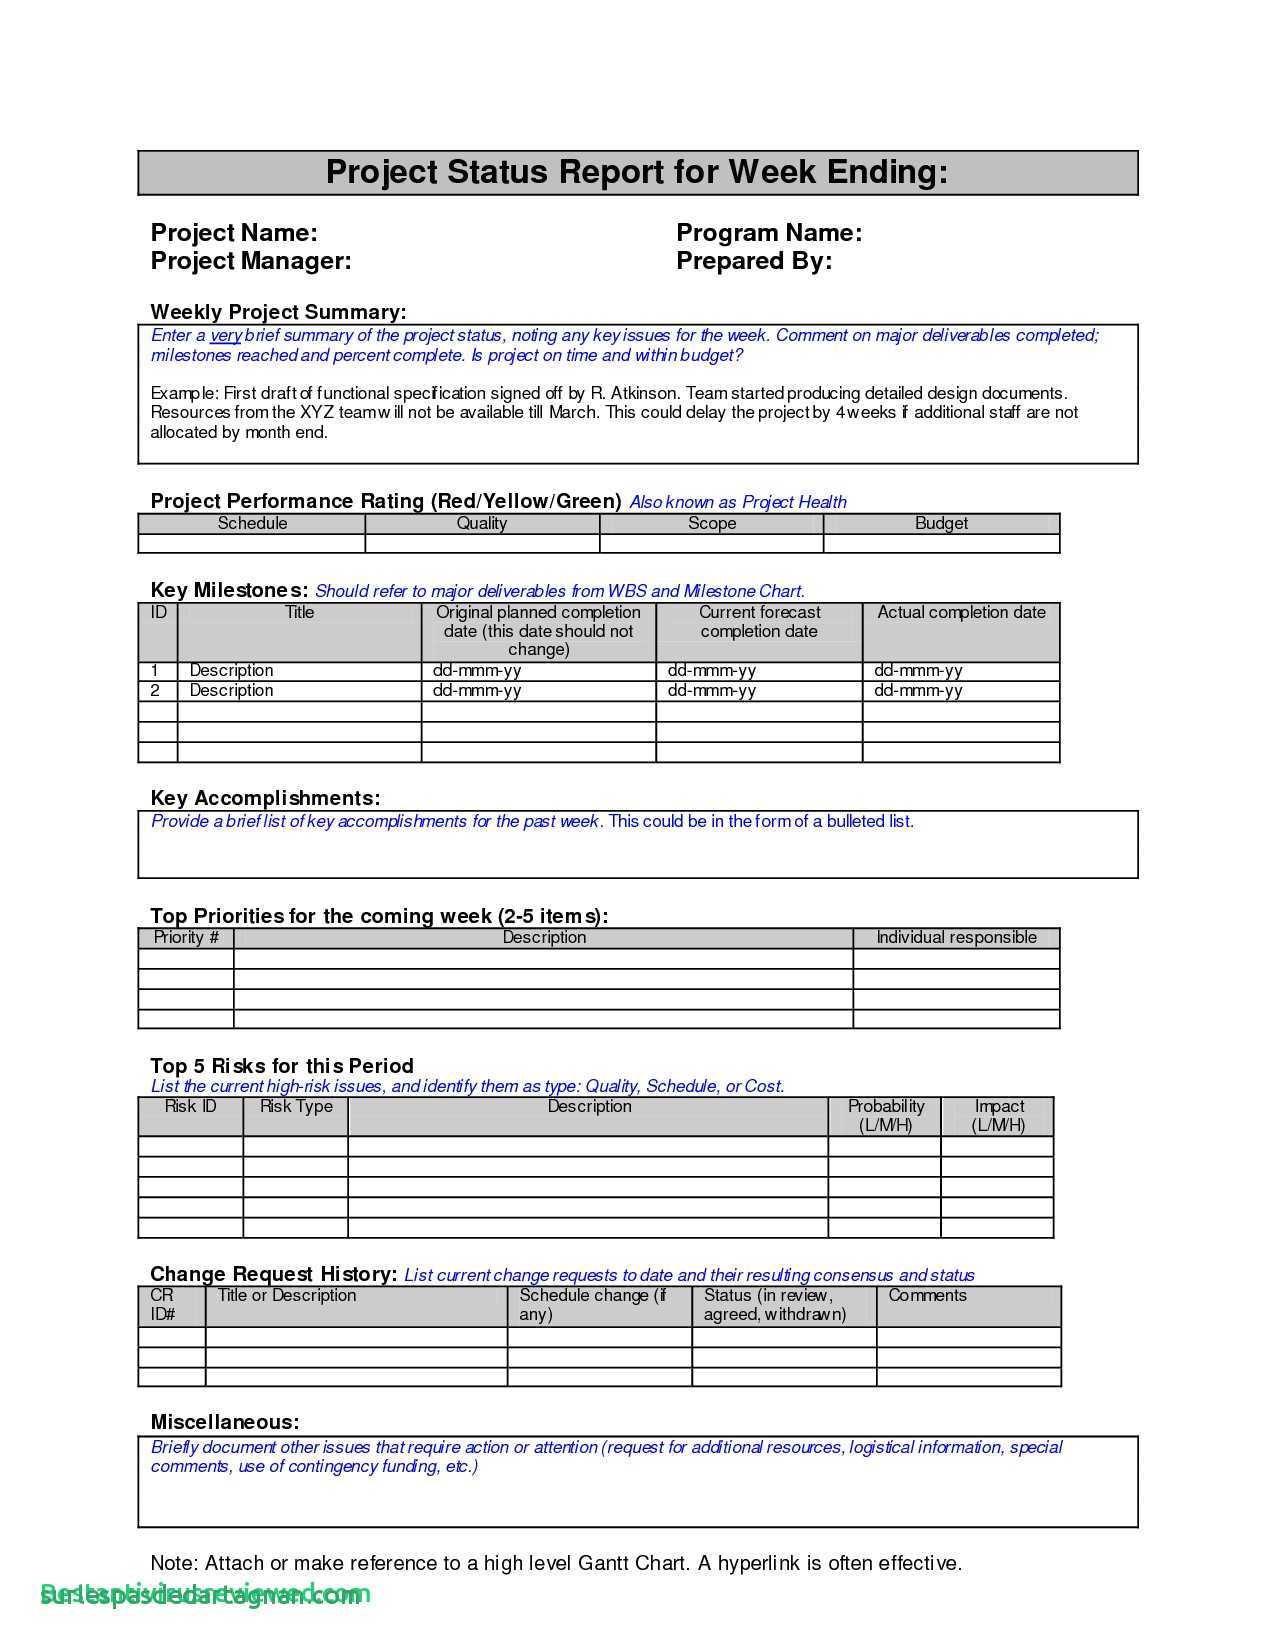 12 Conflict Minerals Reporting Template Example | Radaircars Throughout Conflict Minerals Reporting Template